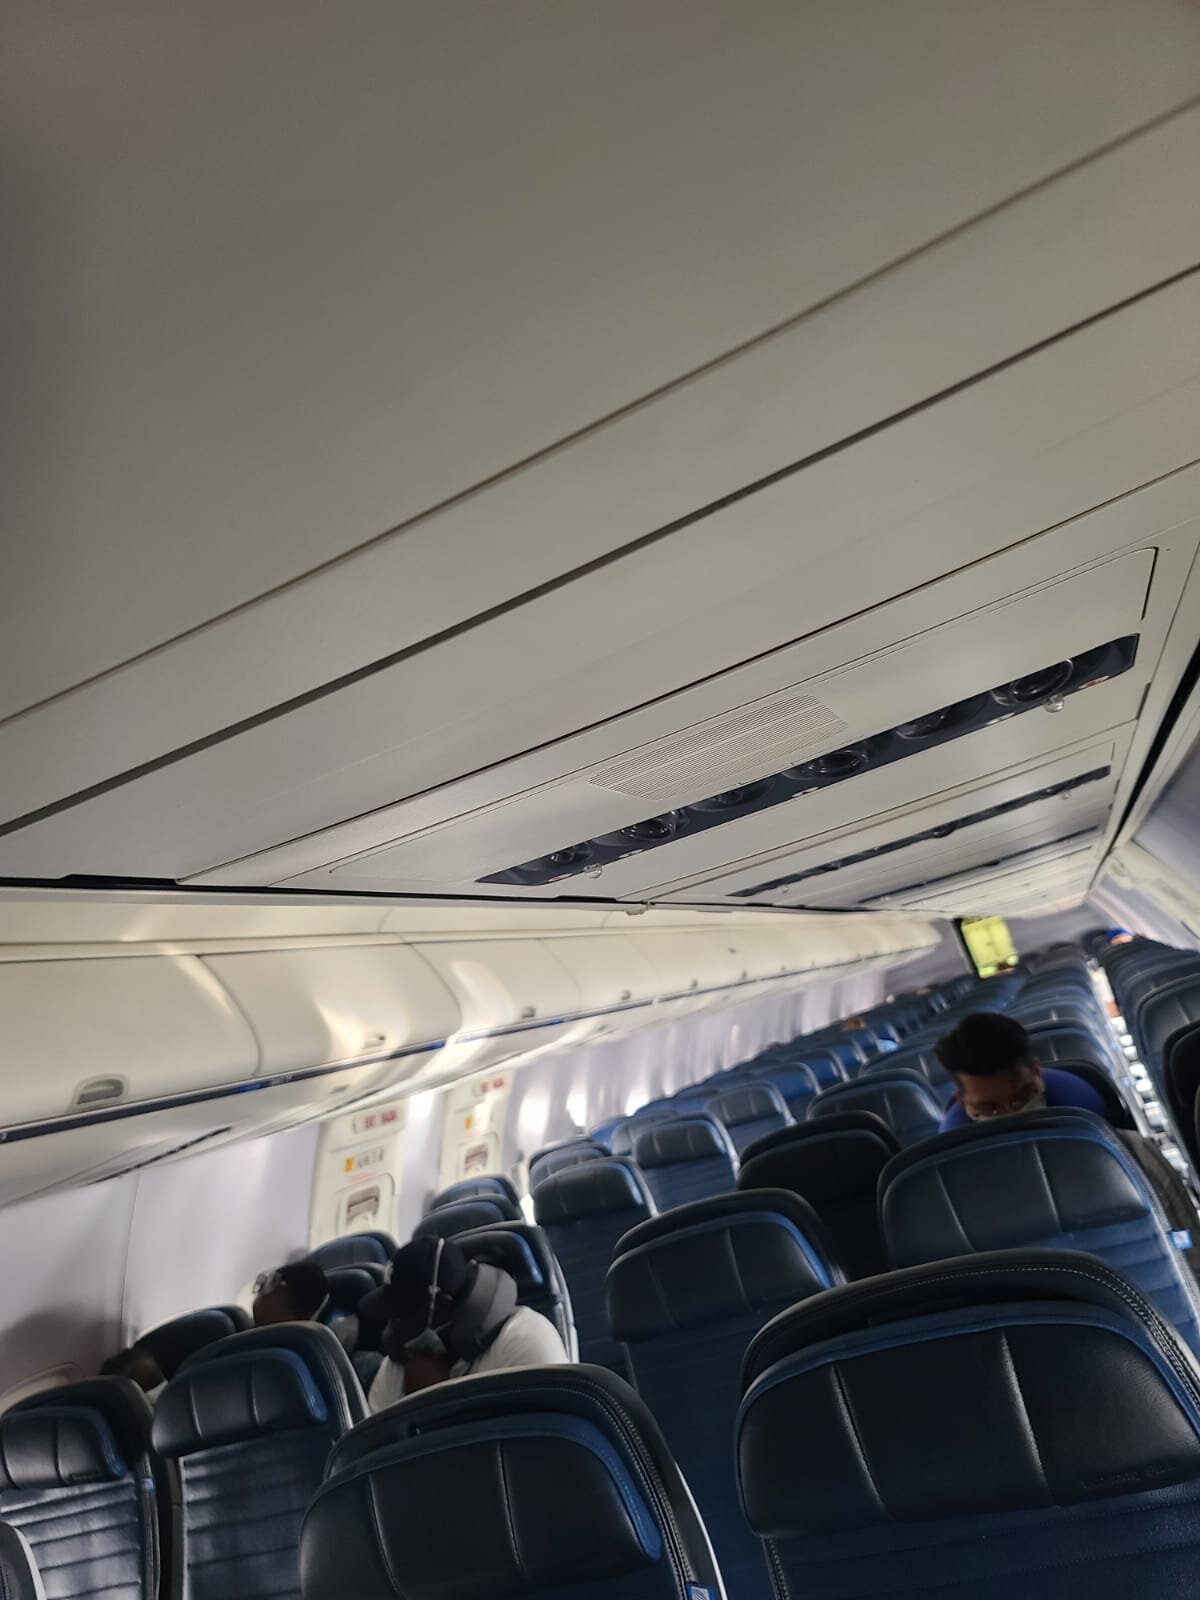  Spent a weekend with The Penn’s in Costa Rica… I’ve never seen a plane this empty before, it was eery! 